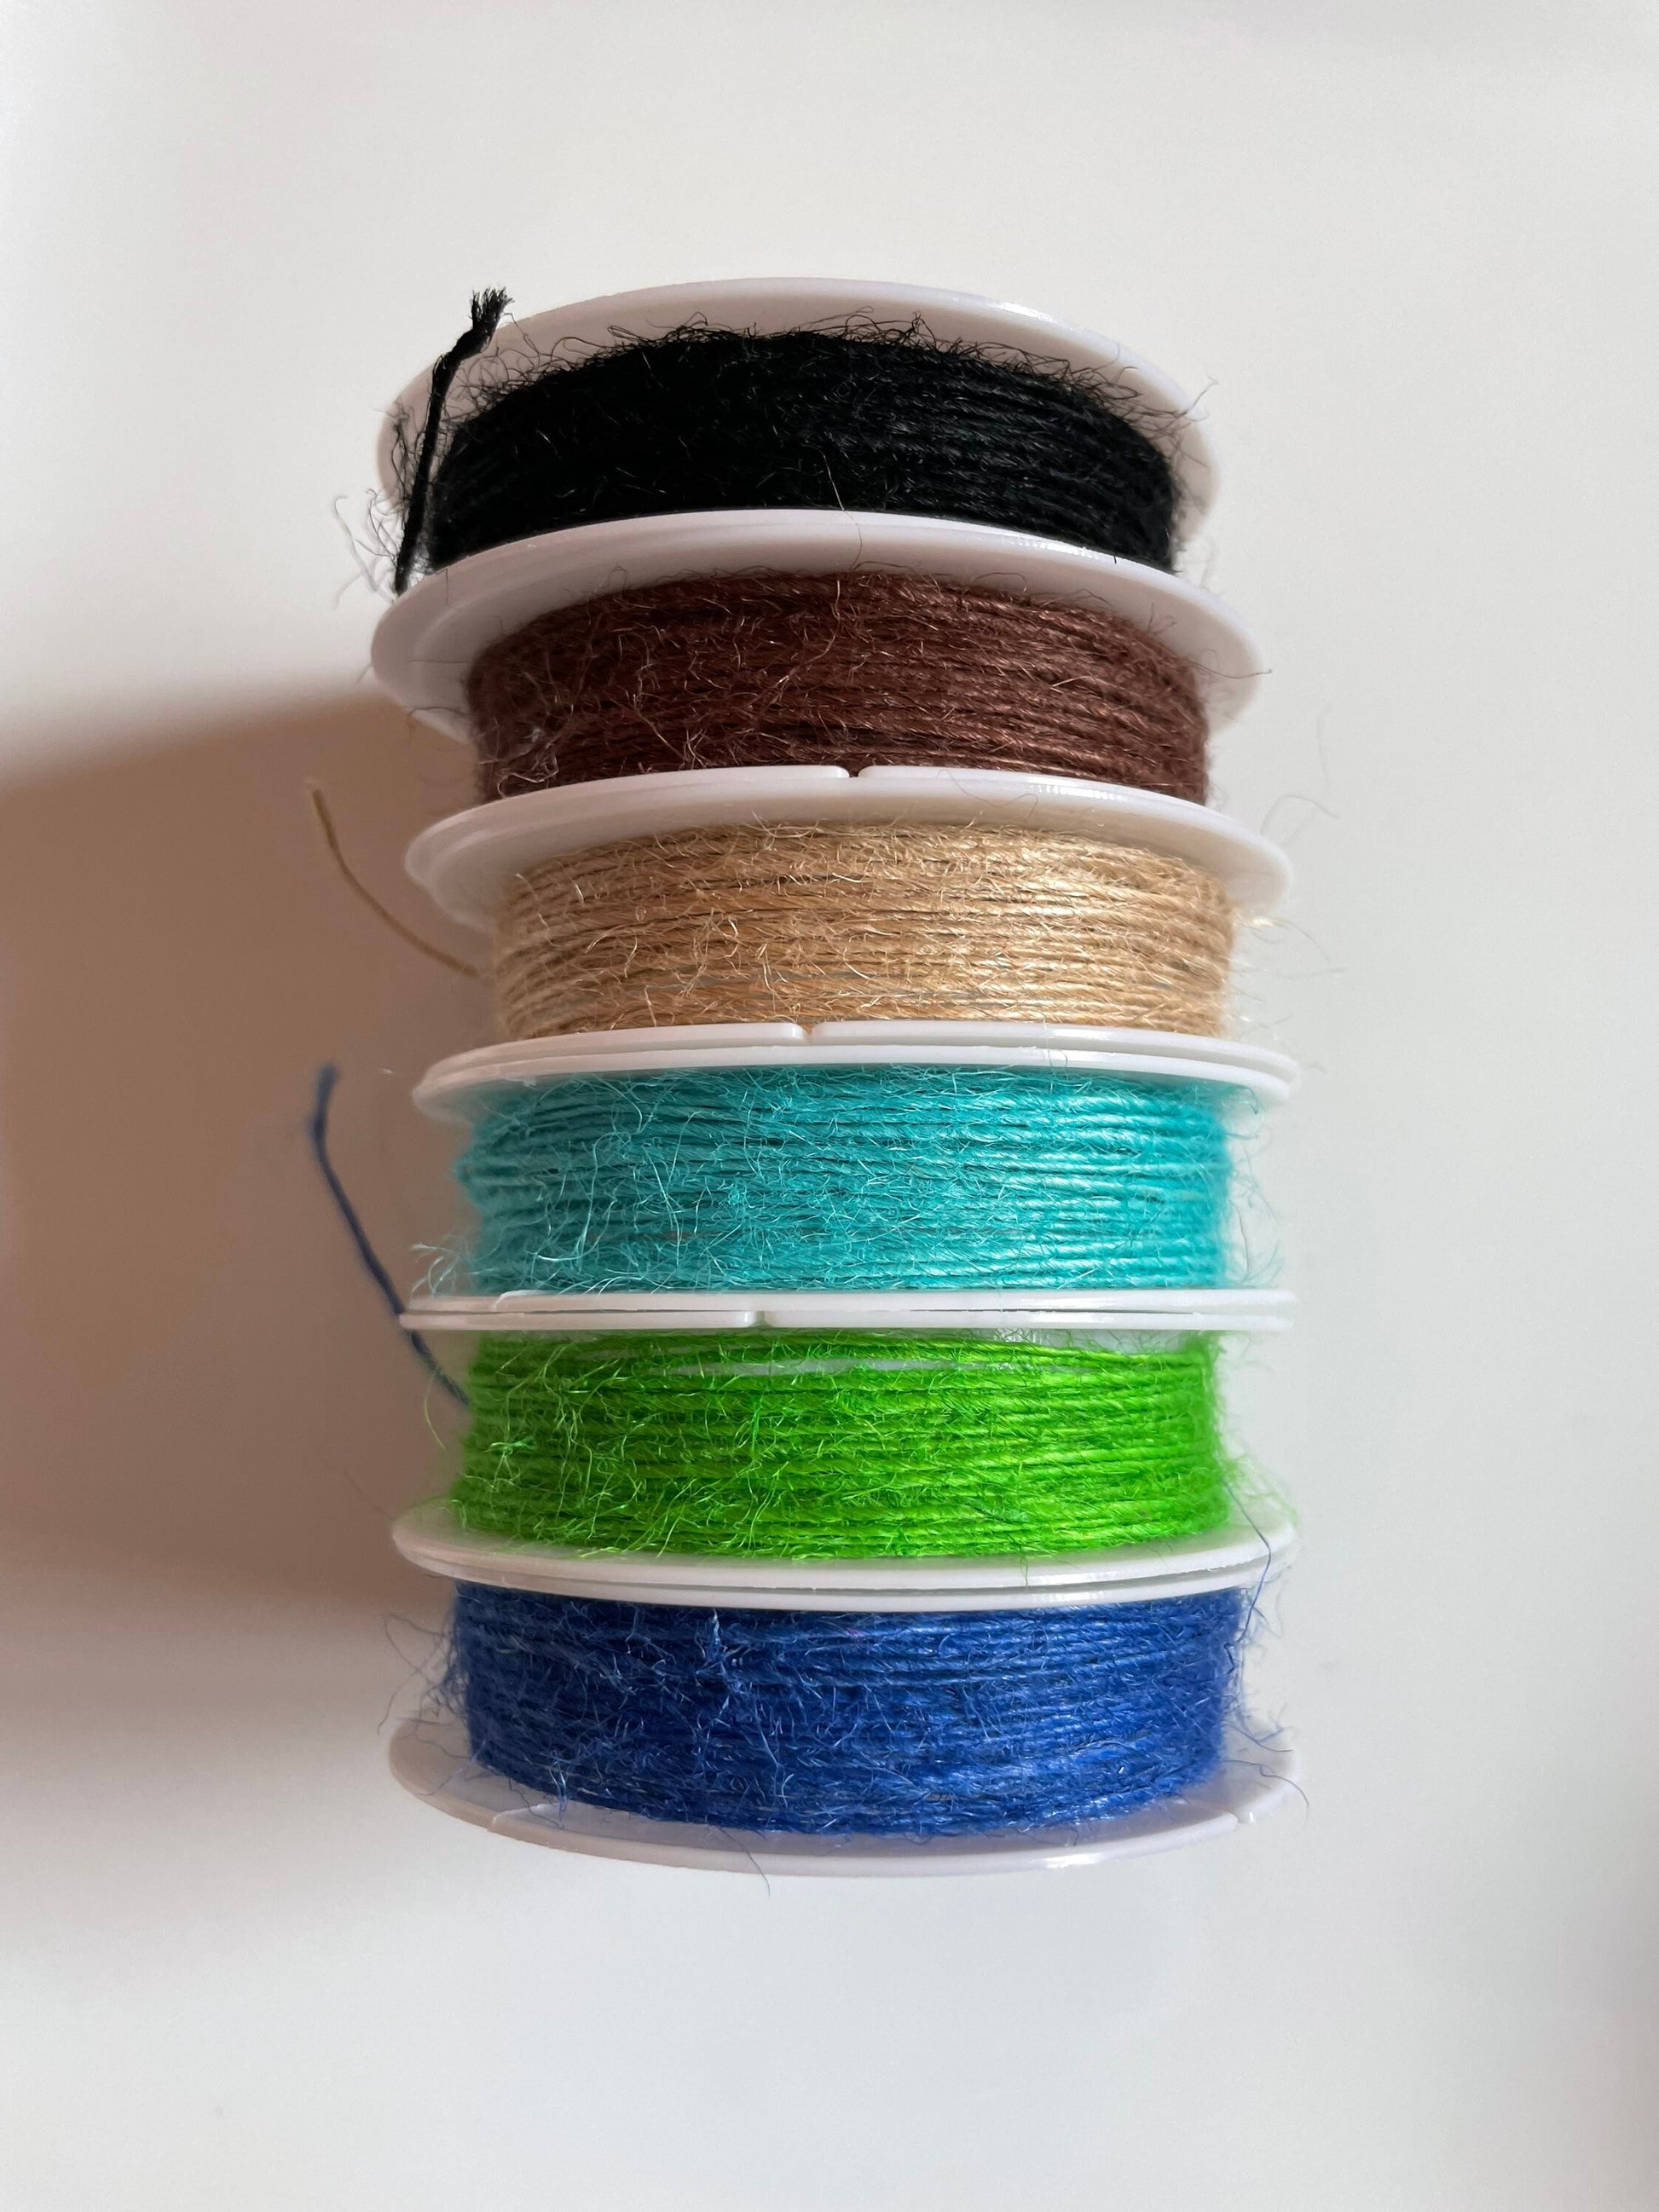 Spool of 5 yards of Assorted Color 1mm Jute Cord String